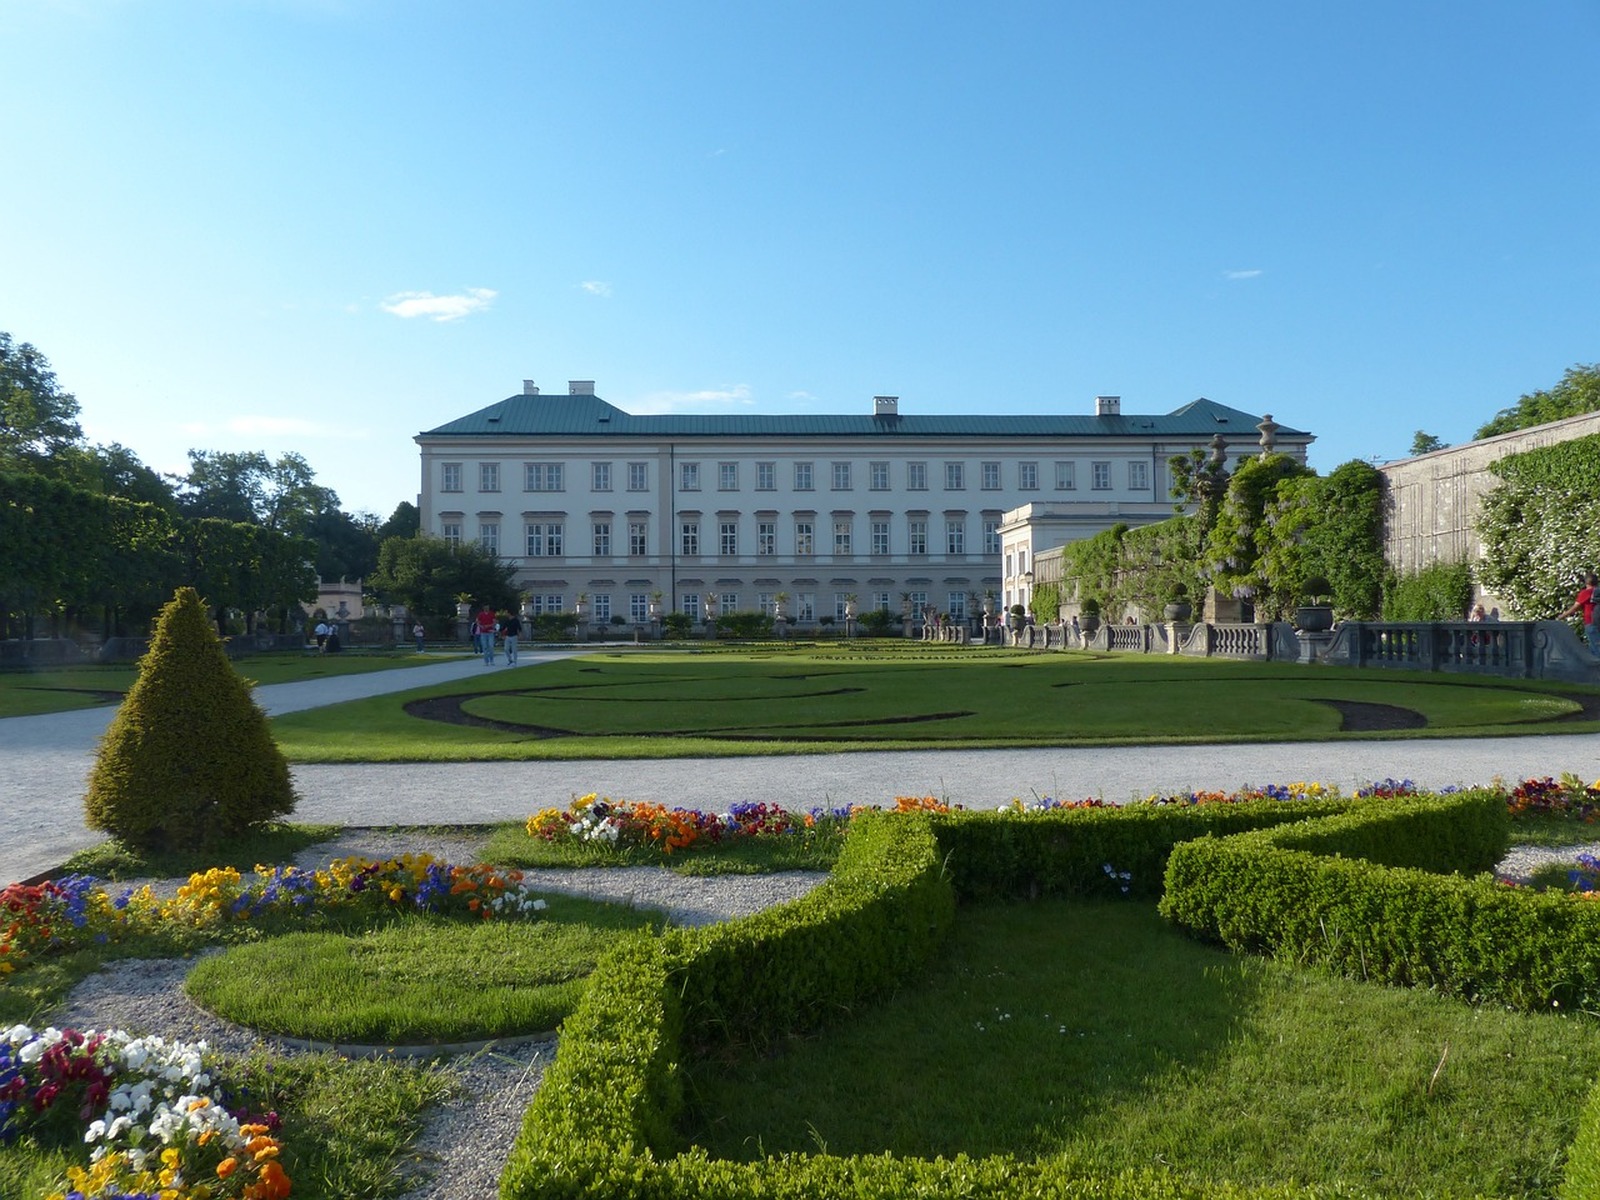 Image of Mirabell Gardens by Team PhotoHound